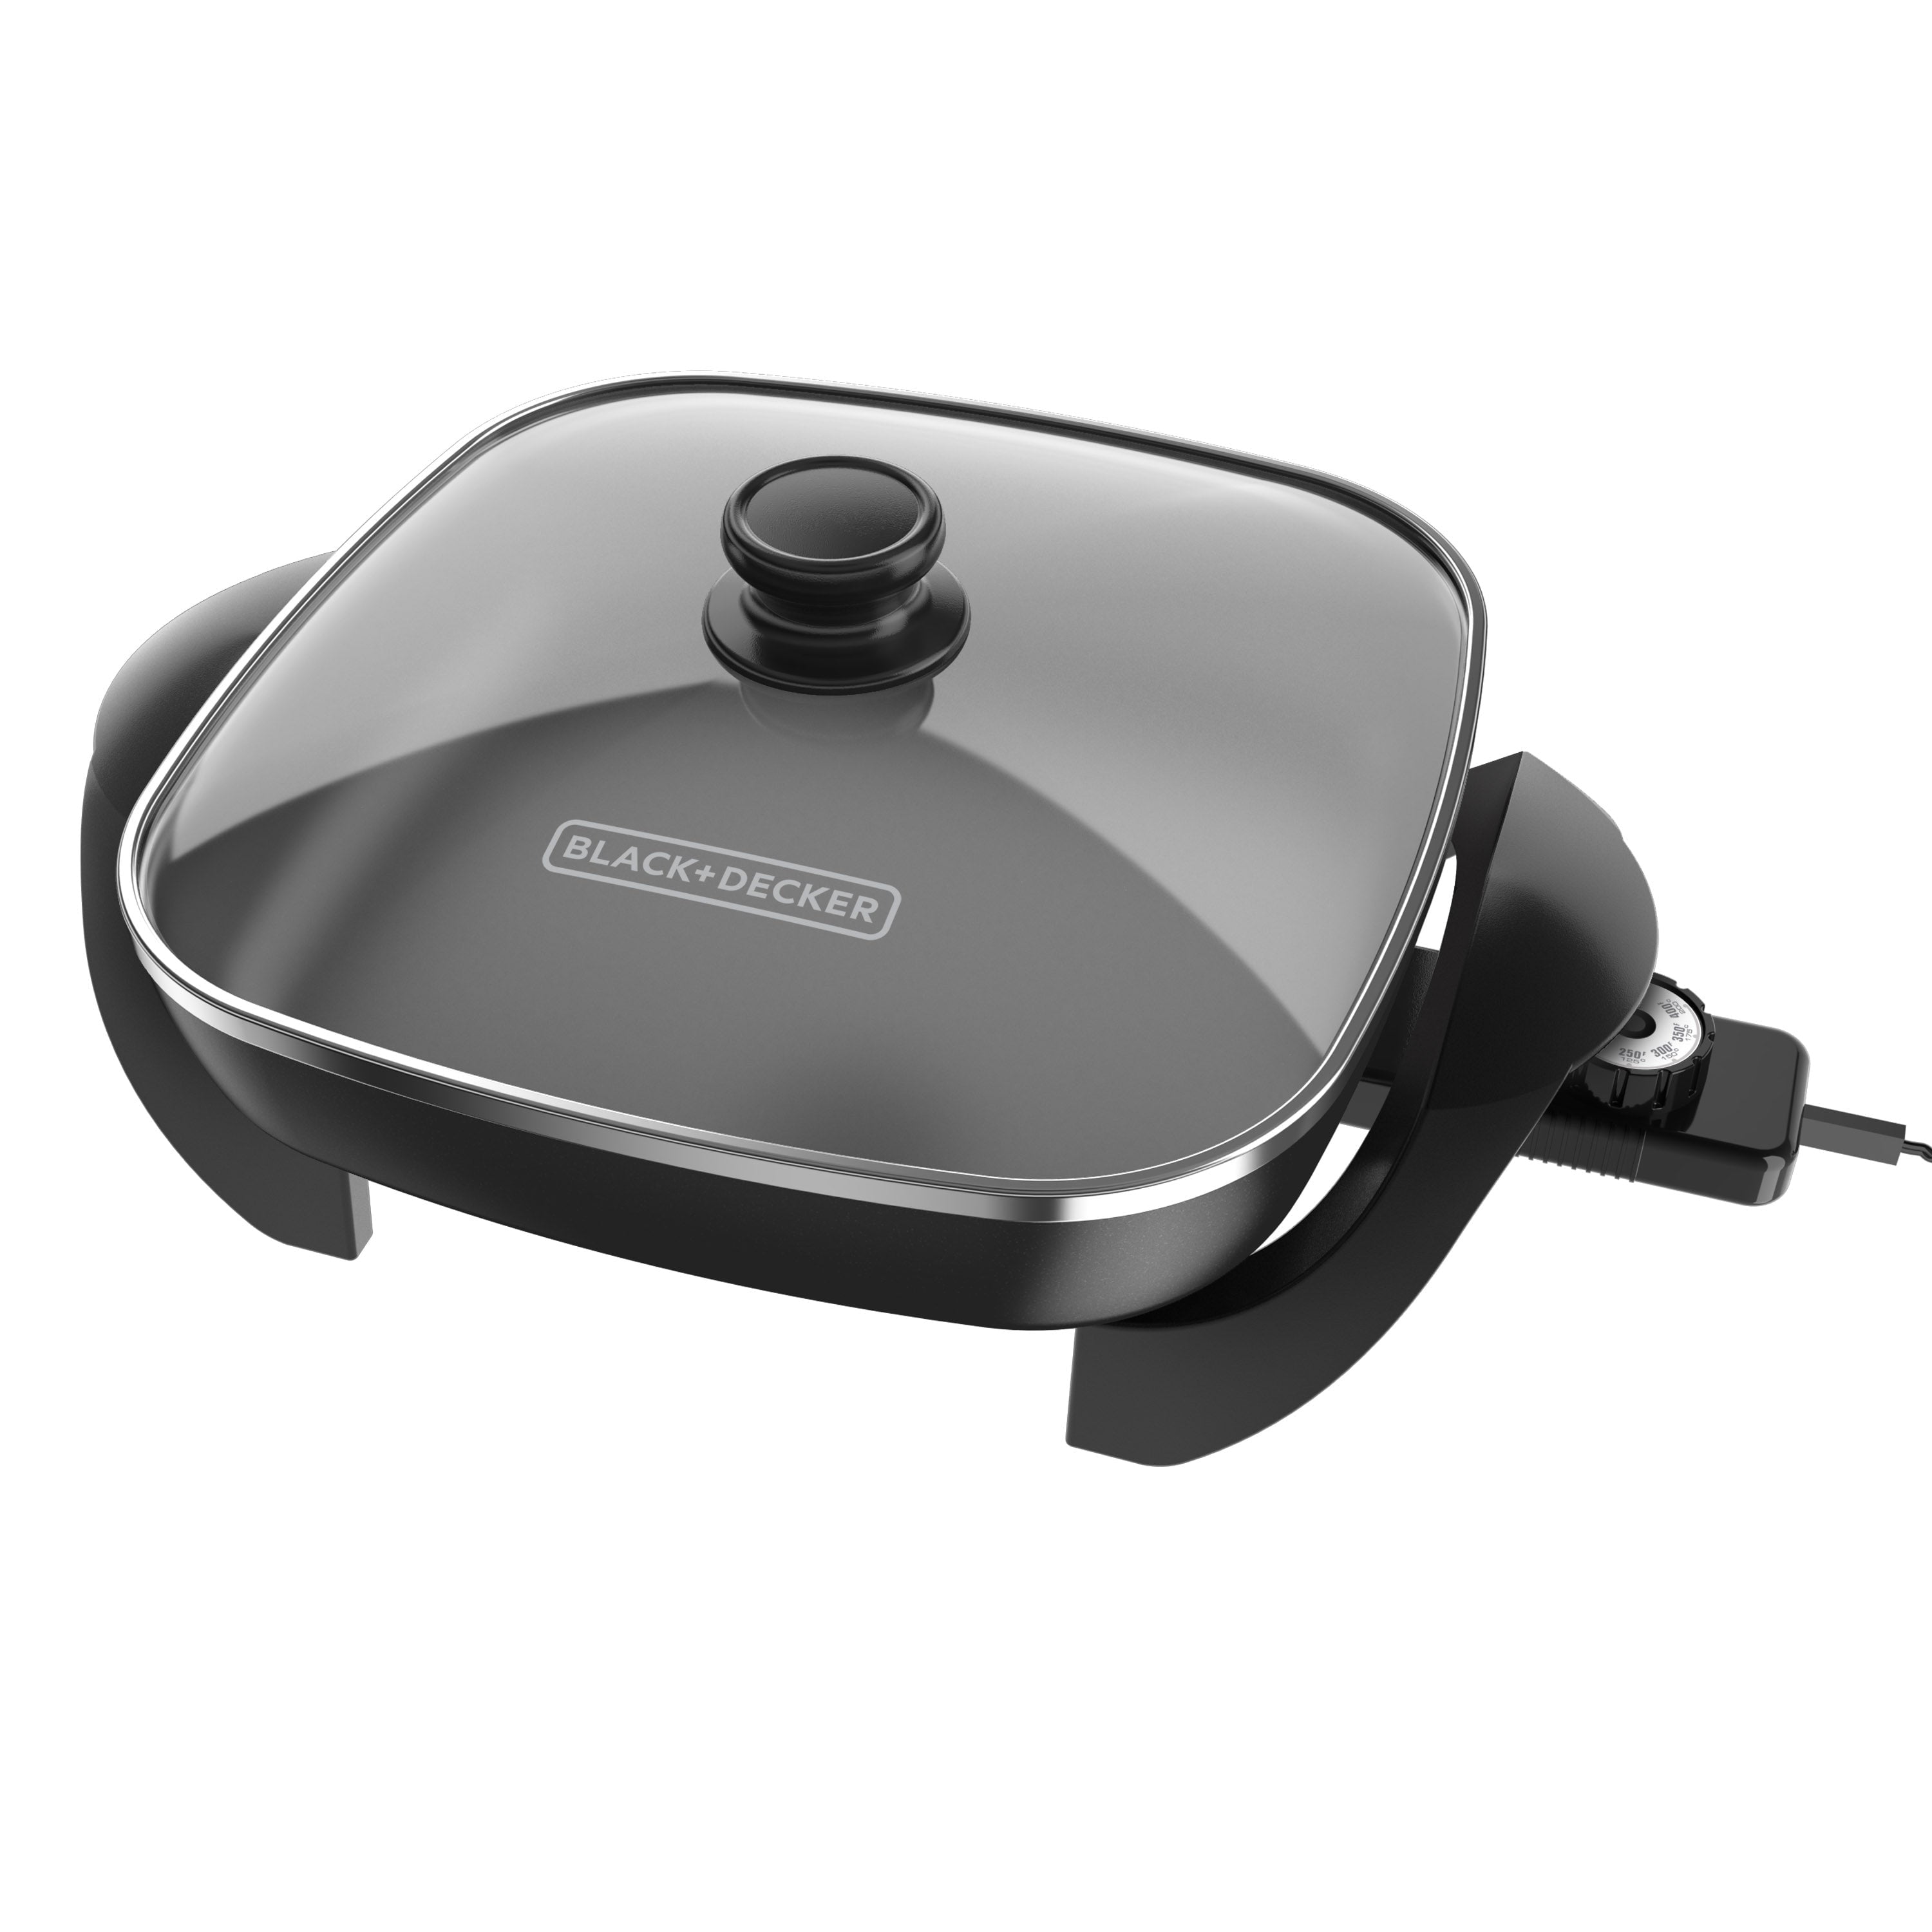  Black & Decker SK1215BC Family Sized Electric Skillet